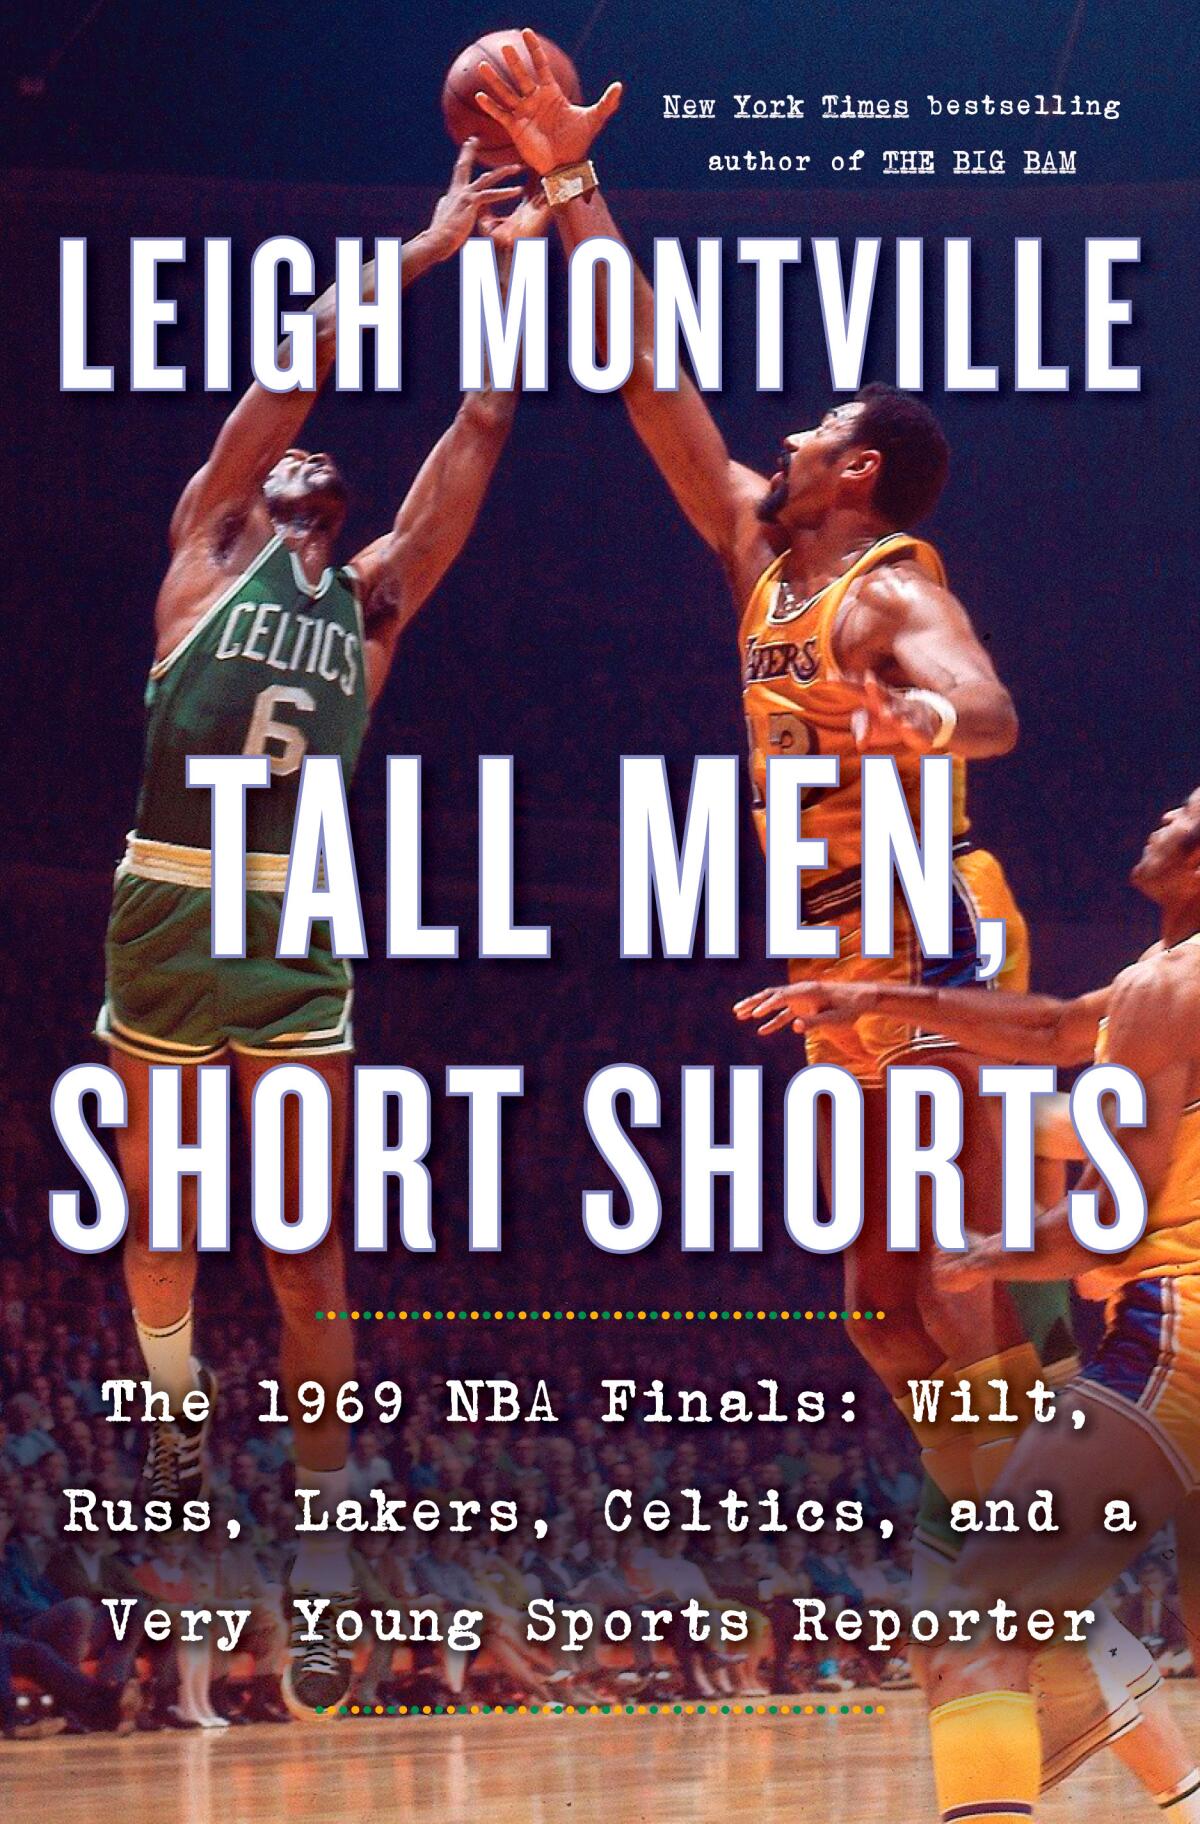 Front cover of Leigh Montville's "Tall Men, Short Shorts"